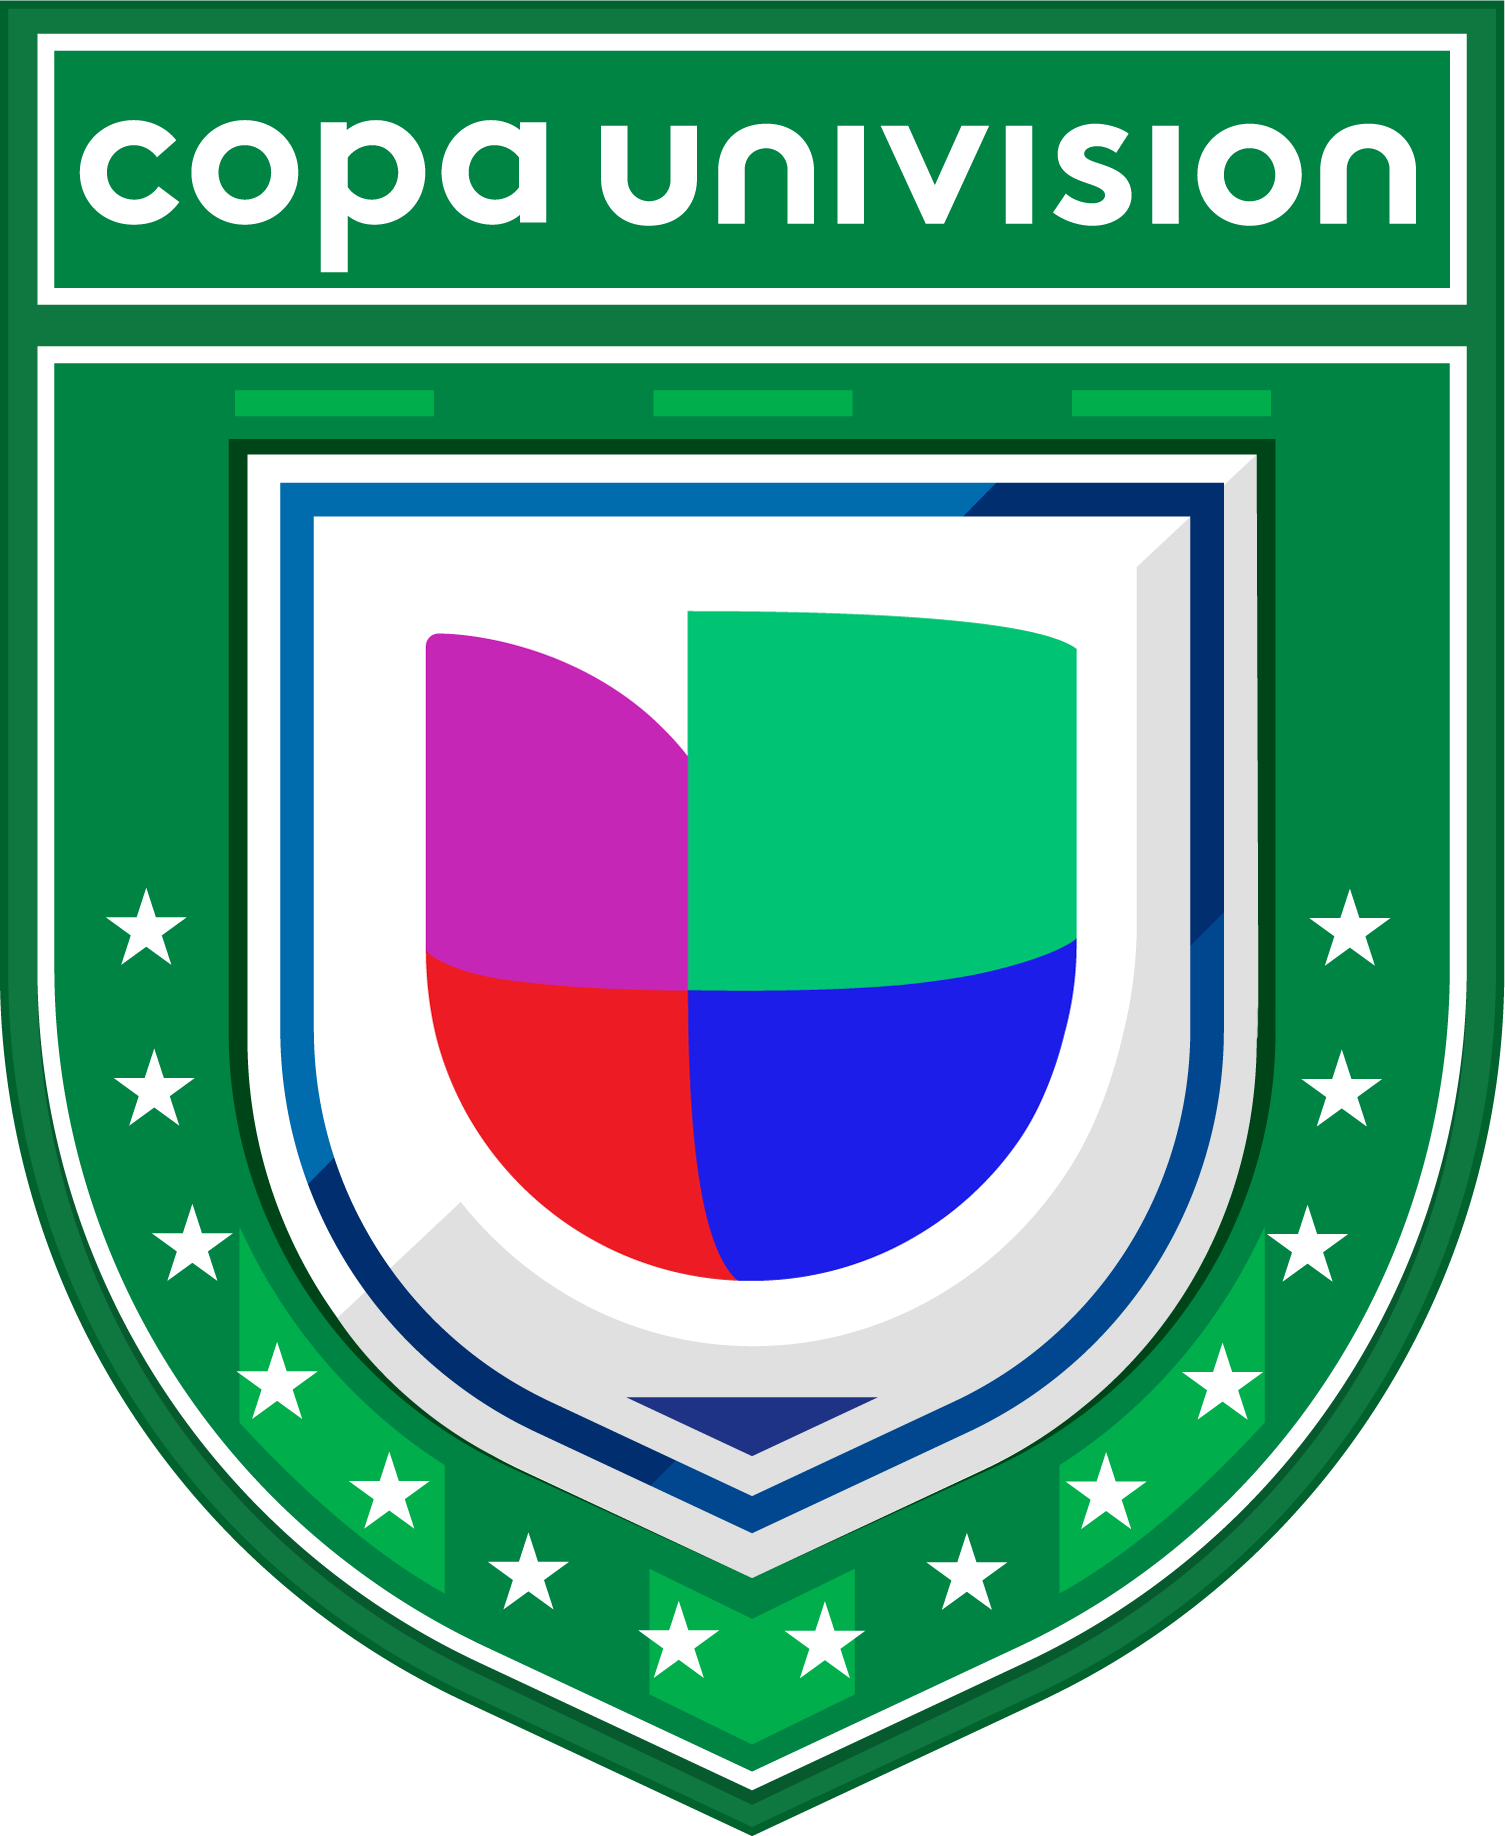 Copa Univision 2019 Offers Fun, FastPaced Soccer for Players of All